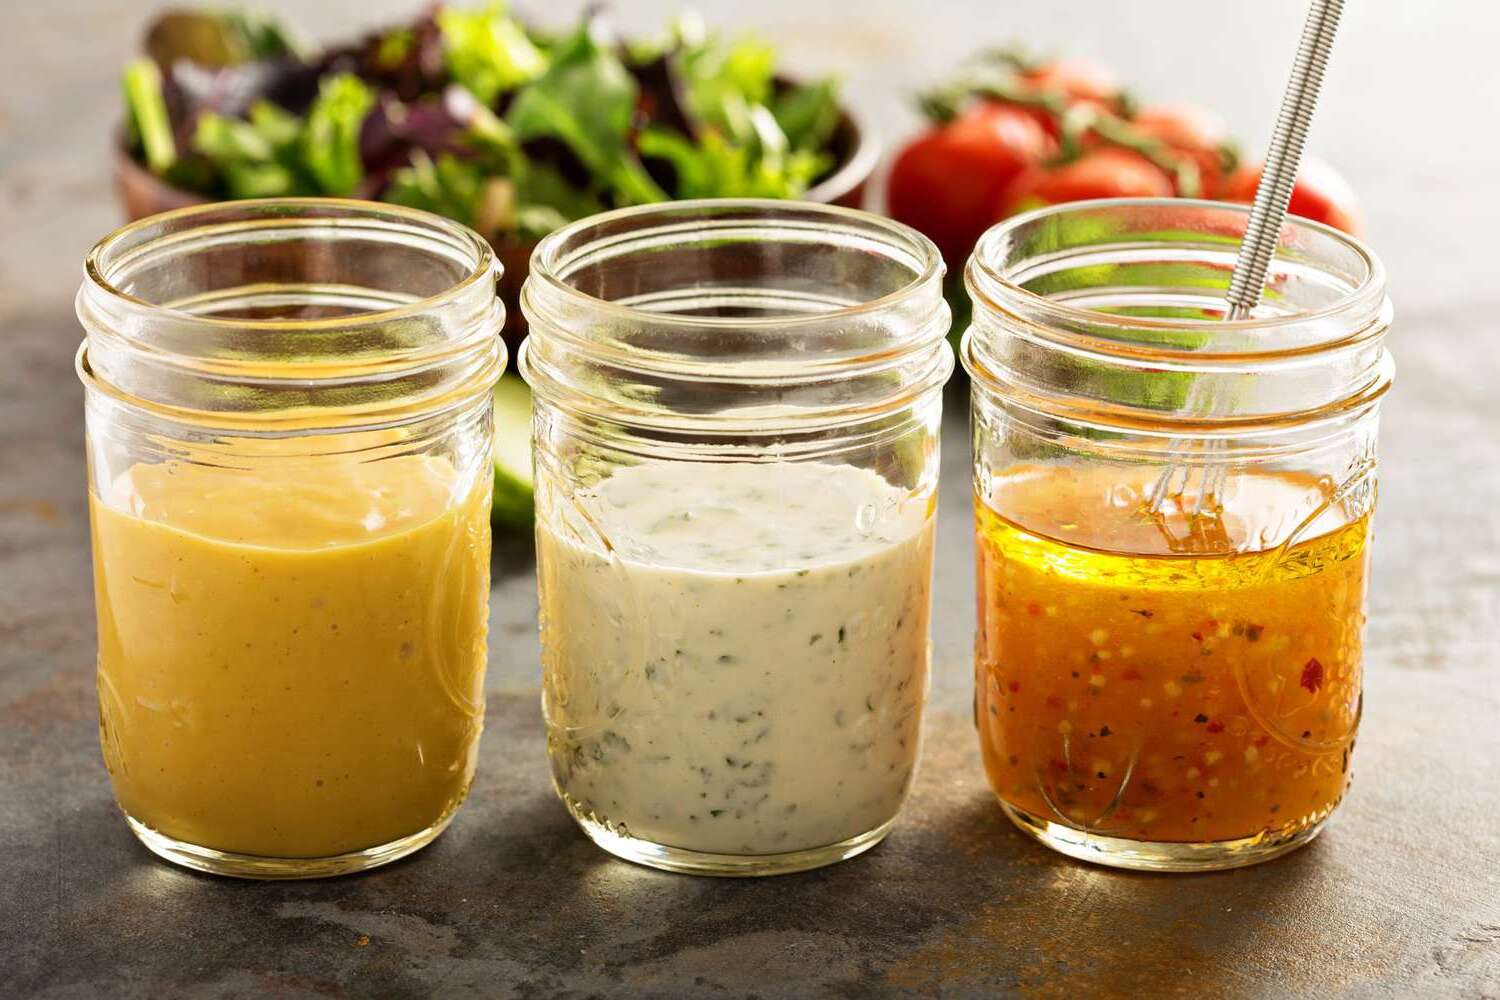 Affordable Homemade Salad Dressings for Every Meal